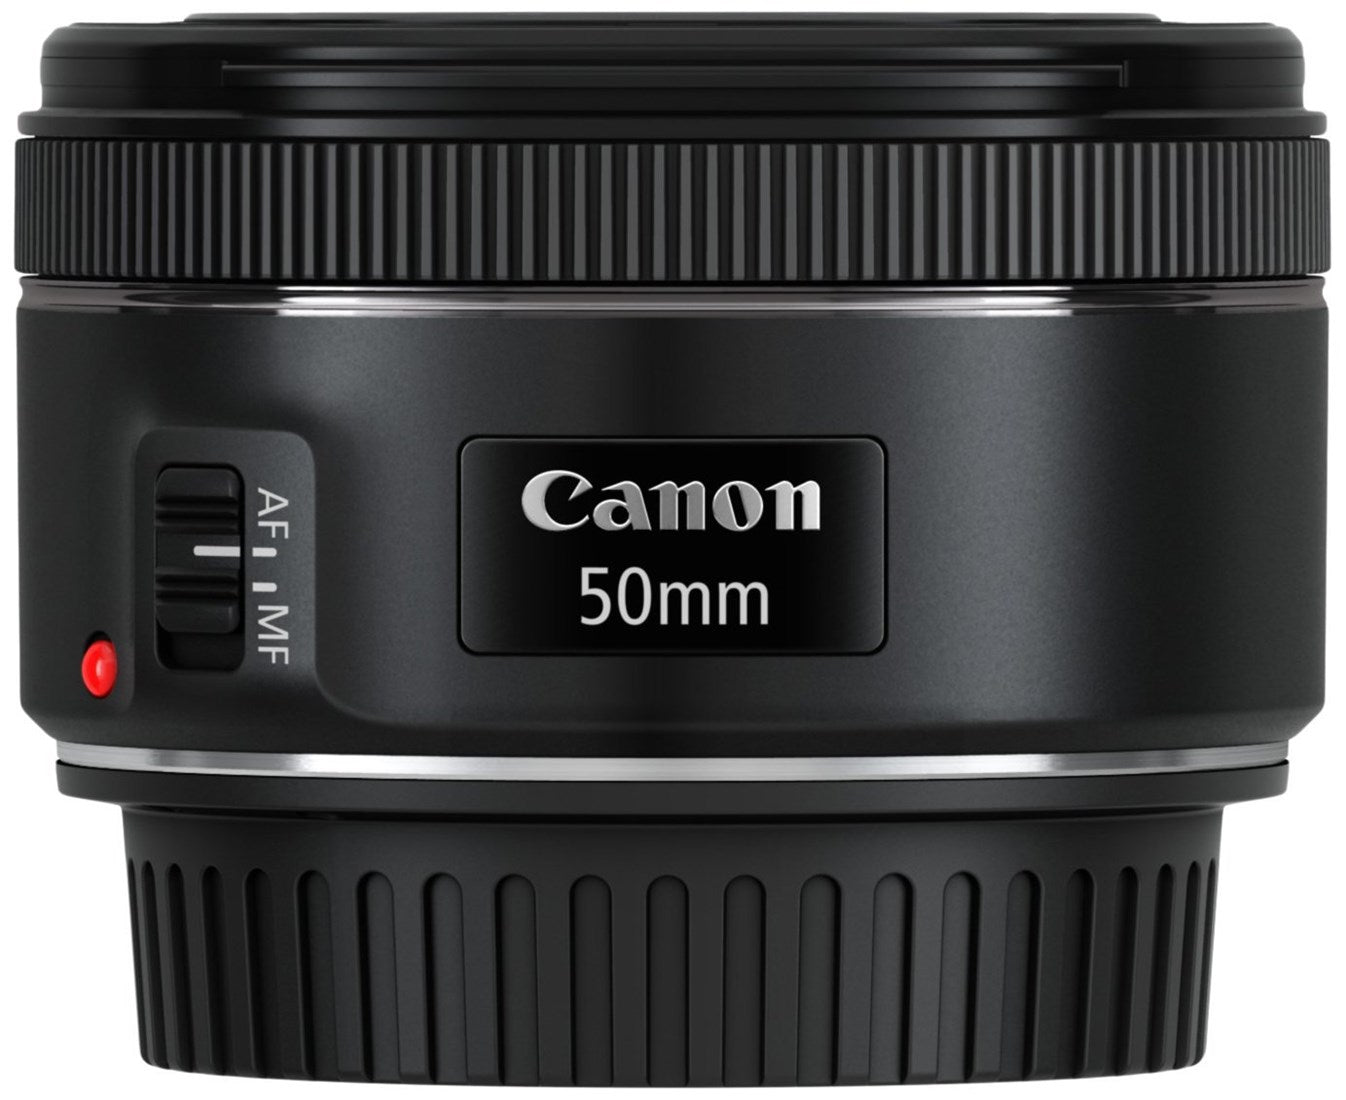 Canon EF 50mm f1.8 STM Prime Lens - Product Photo 1 - Stand Up View